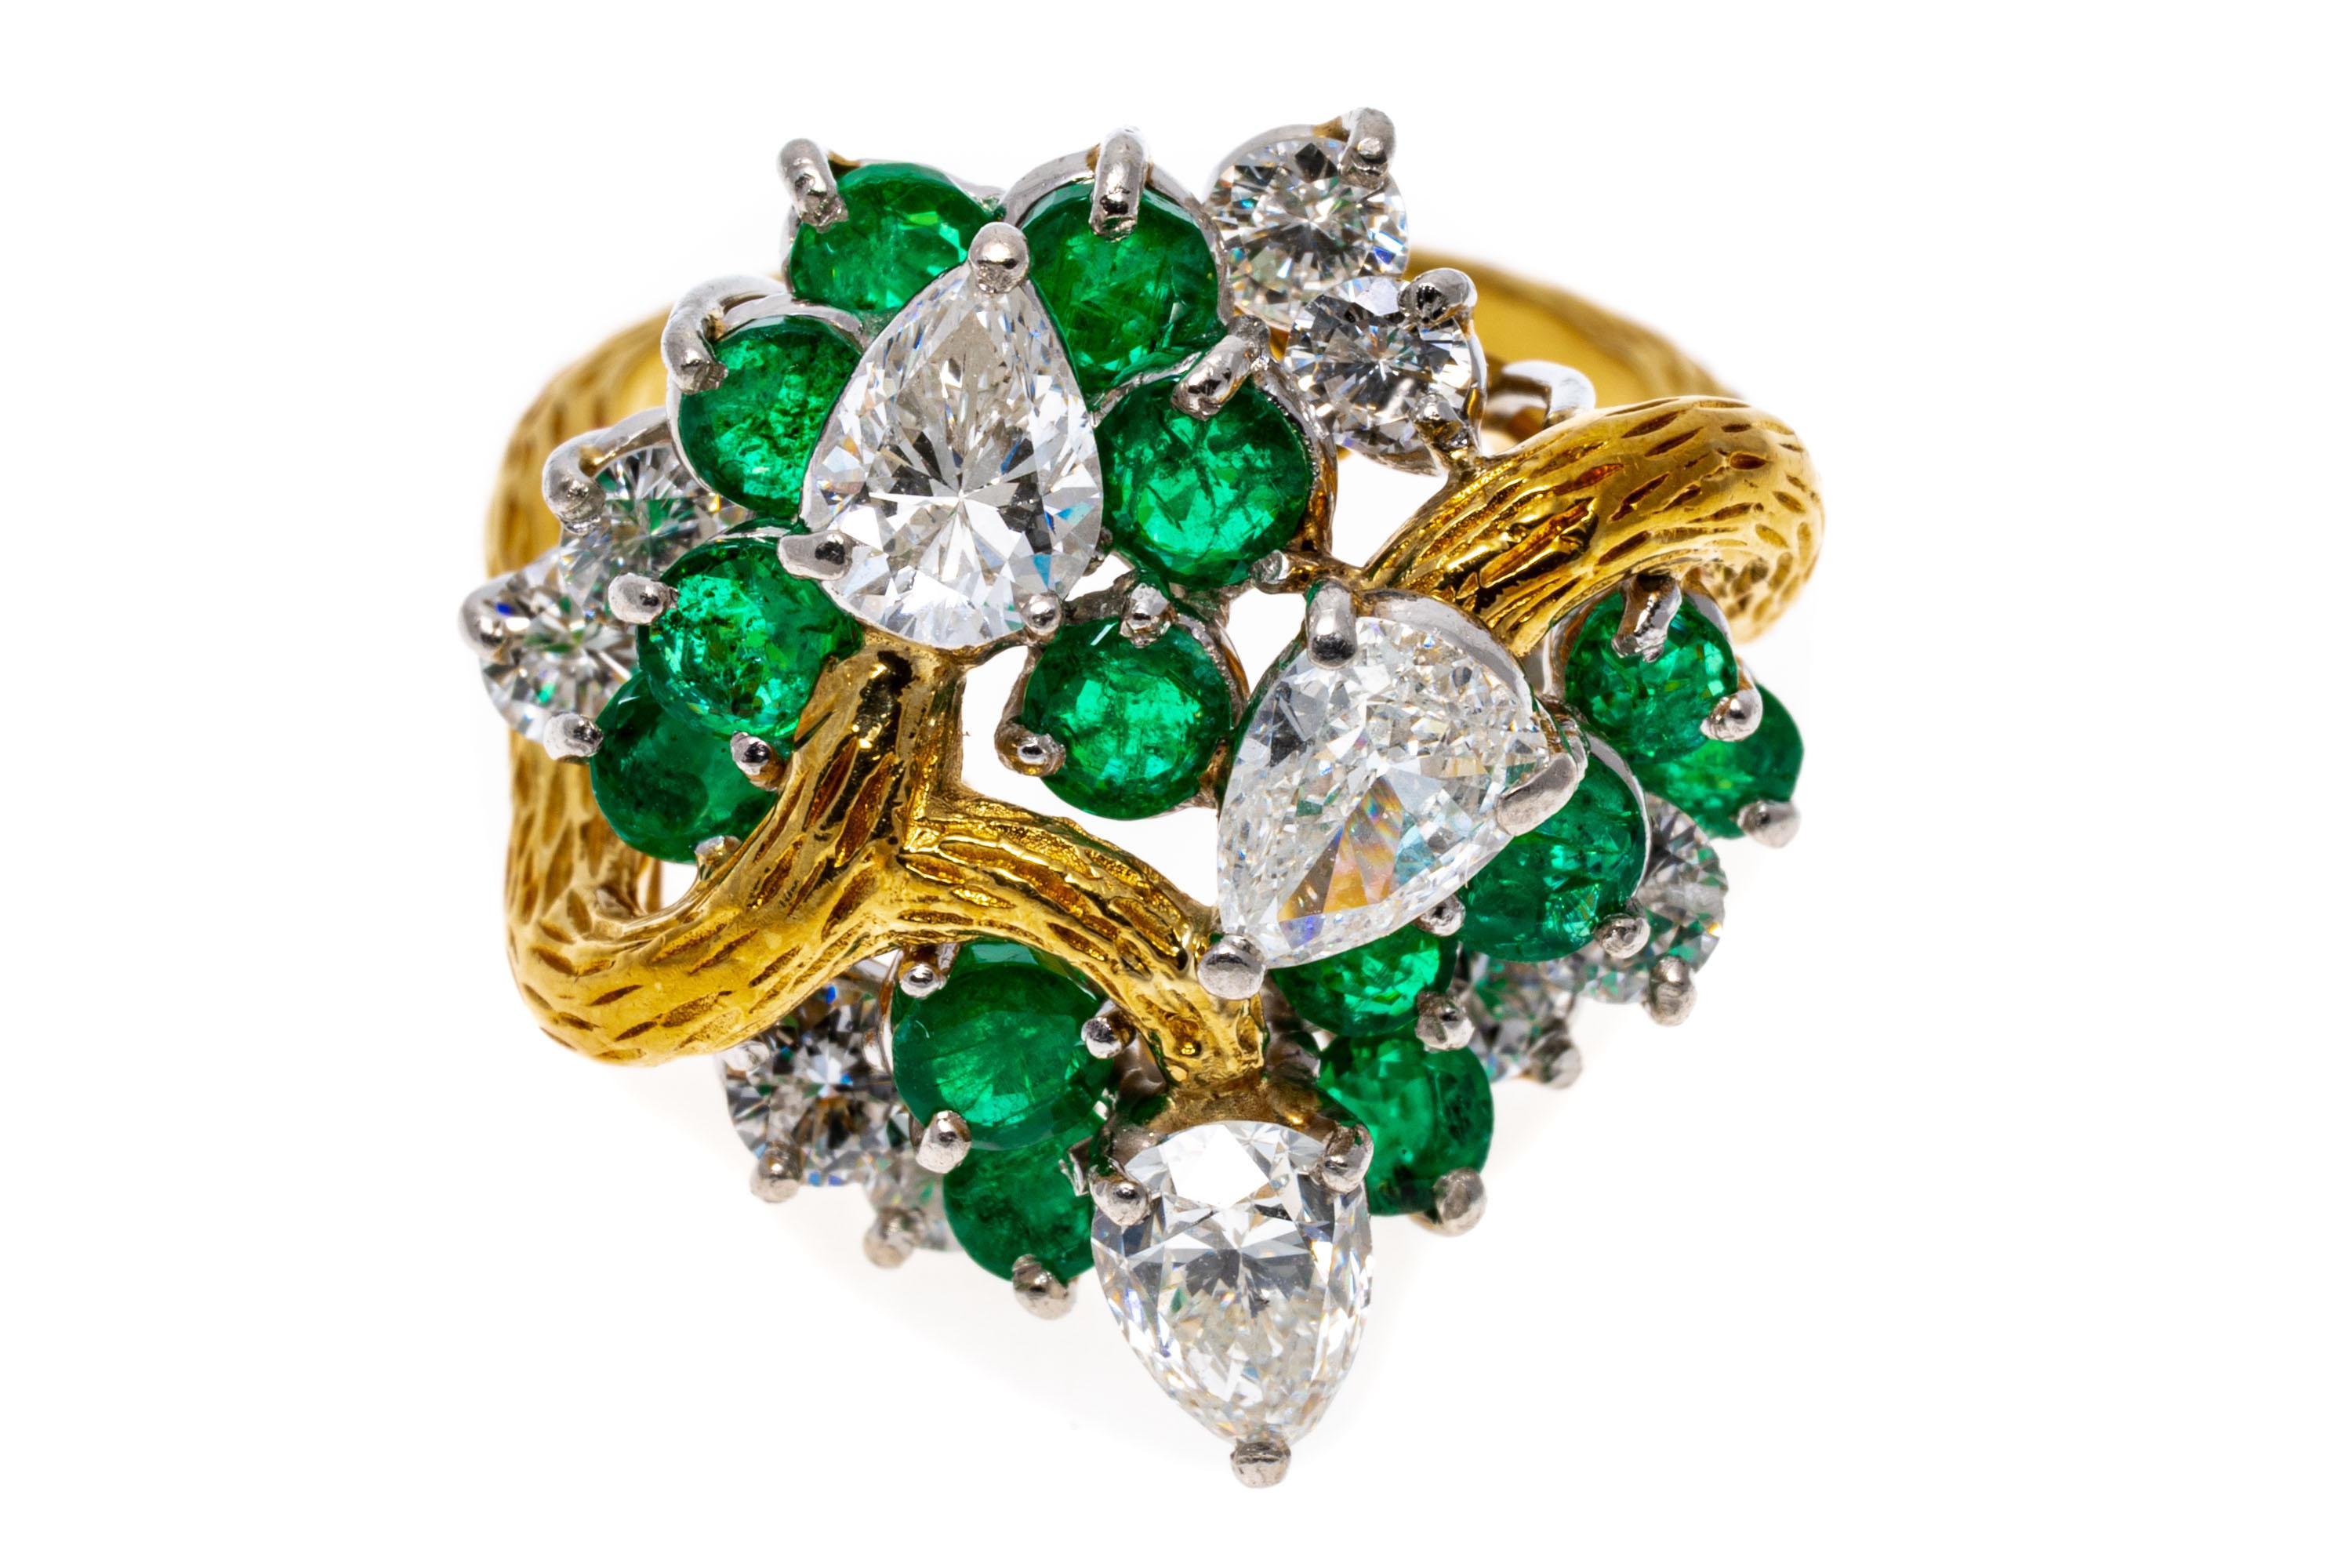 18k yellow gold ring. This stunning cluster ring is a bypass swirl of round faceted, bright green color emeralds approximately 1.56 TCW, scattered among round brilliant cut diamonds, approximately 0.78 TCW. Swirled among the round emeralds and